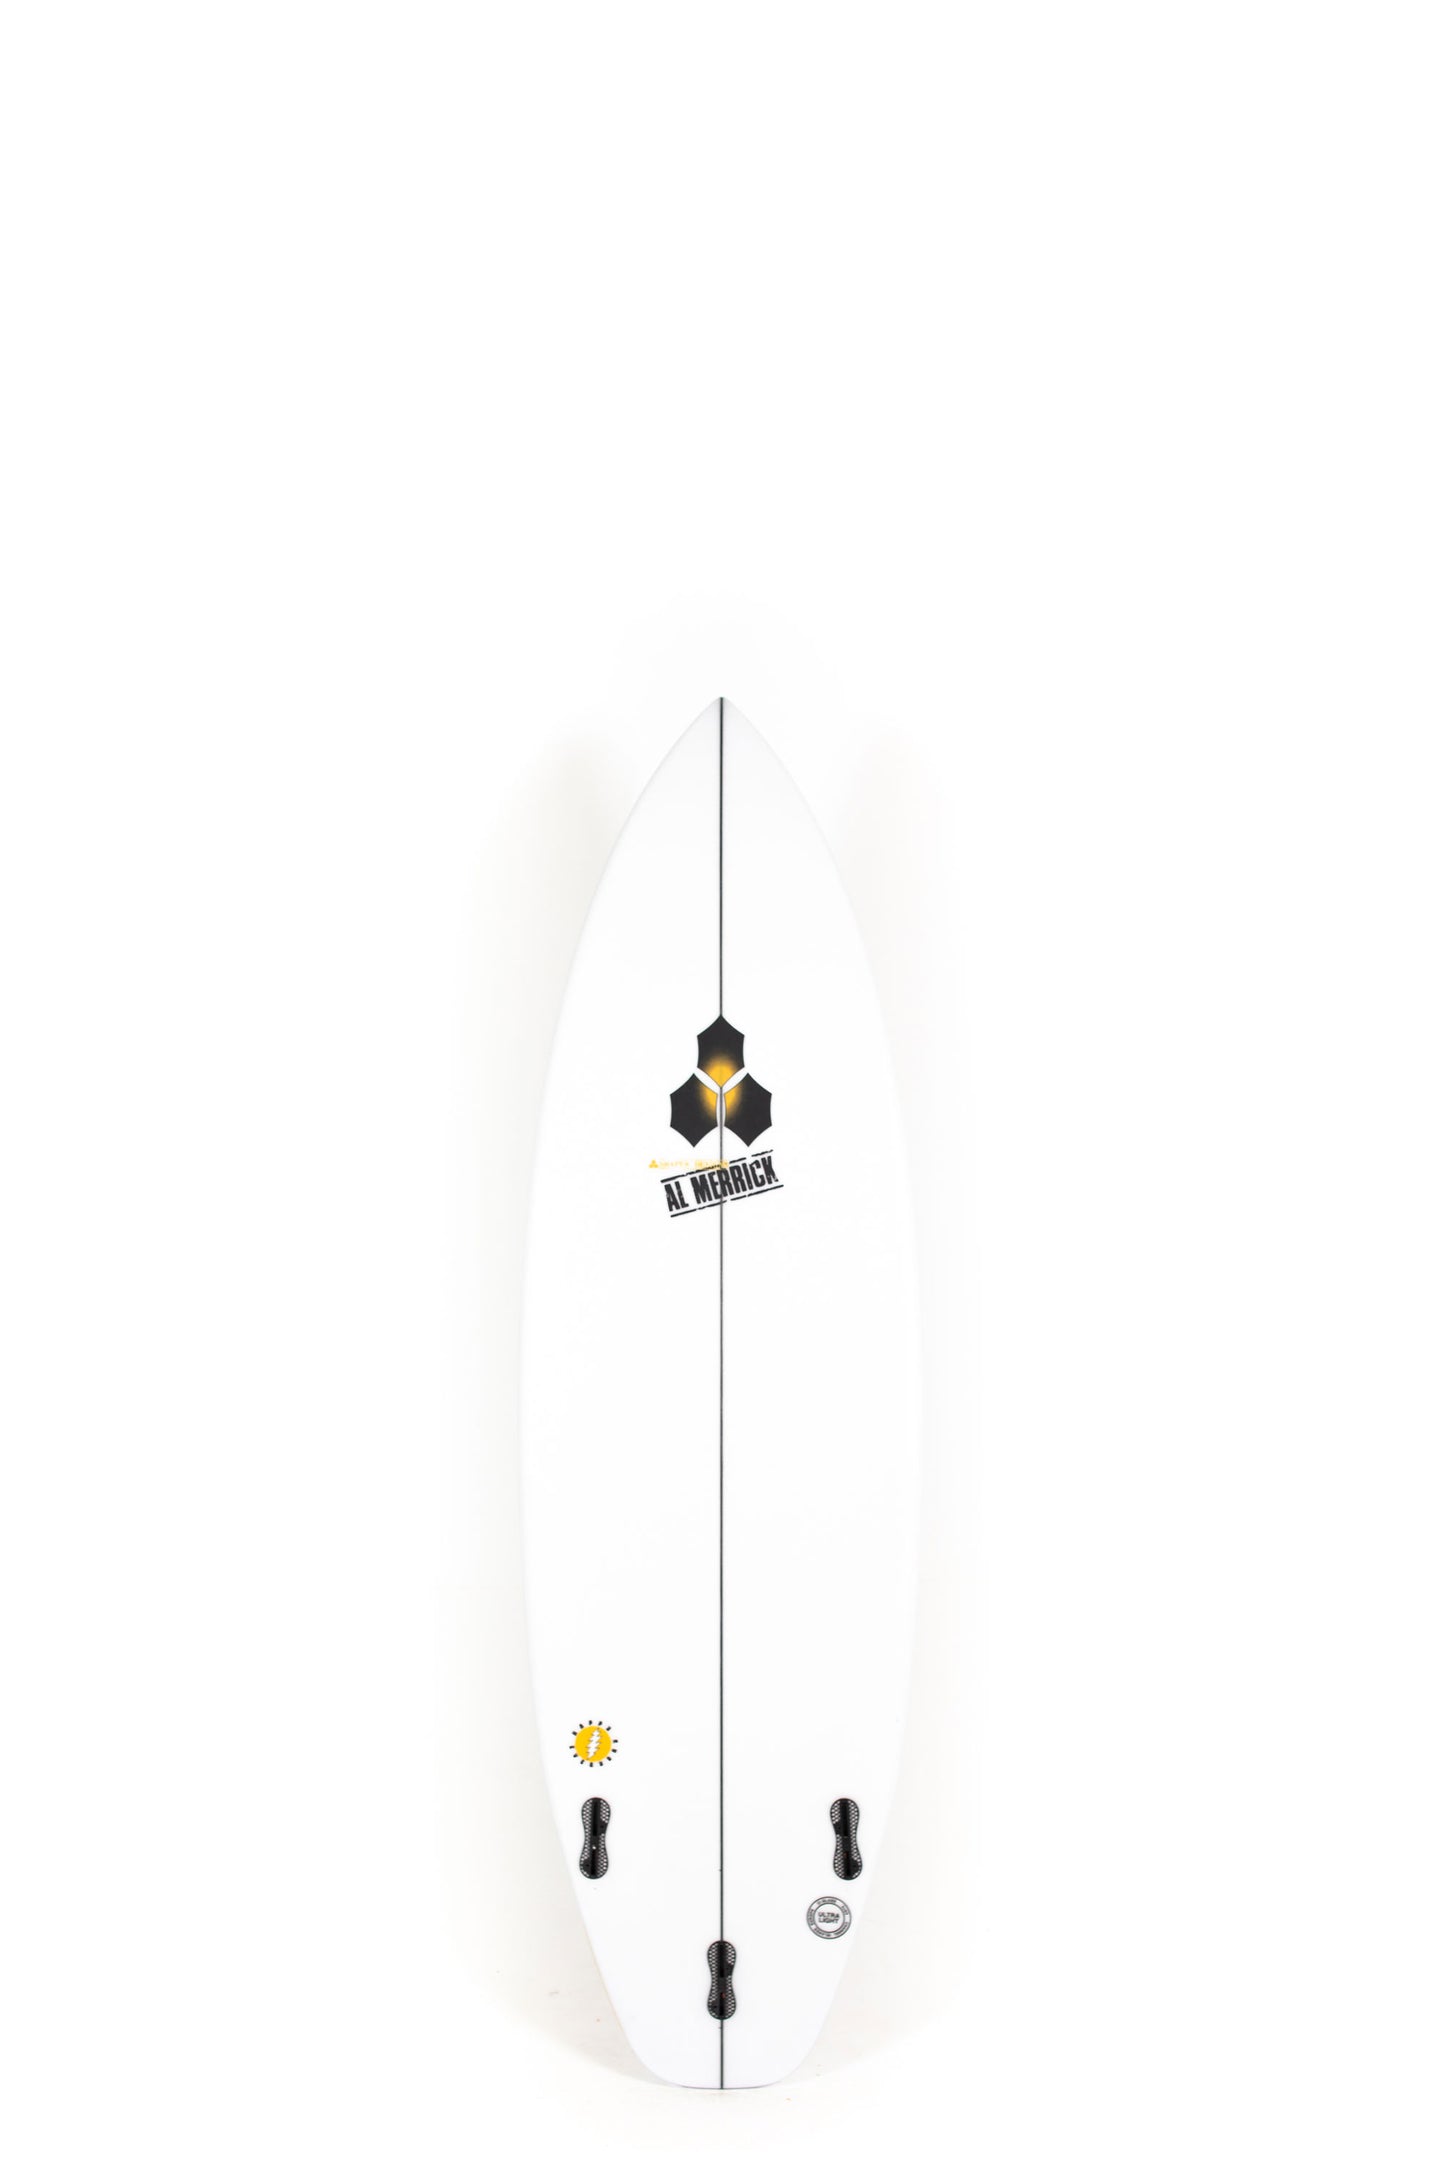 Pukas-Surf-Shop-Channel-Island-Surfboards-Happy-Every-Day-Al-Merrick-6_1_